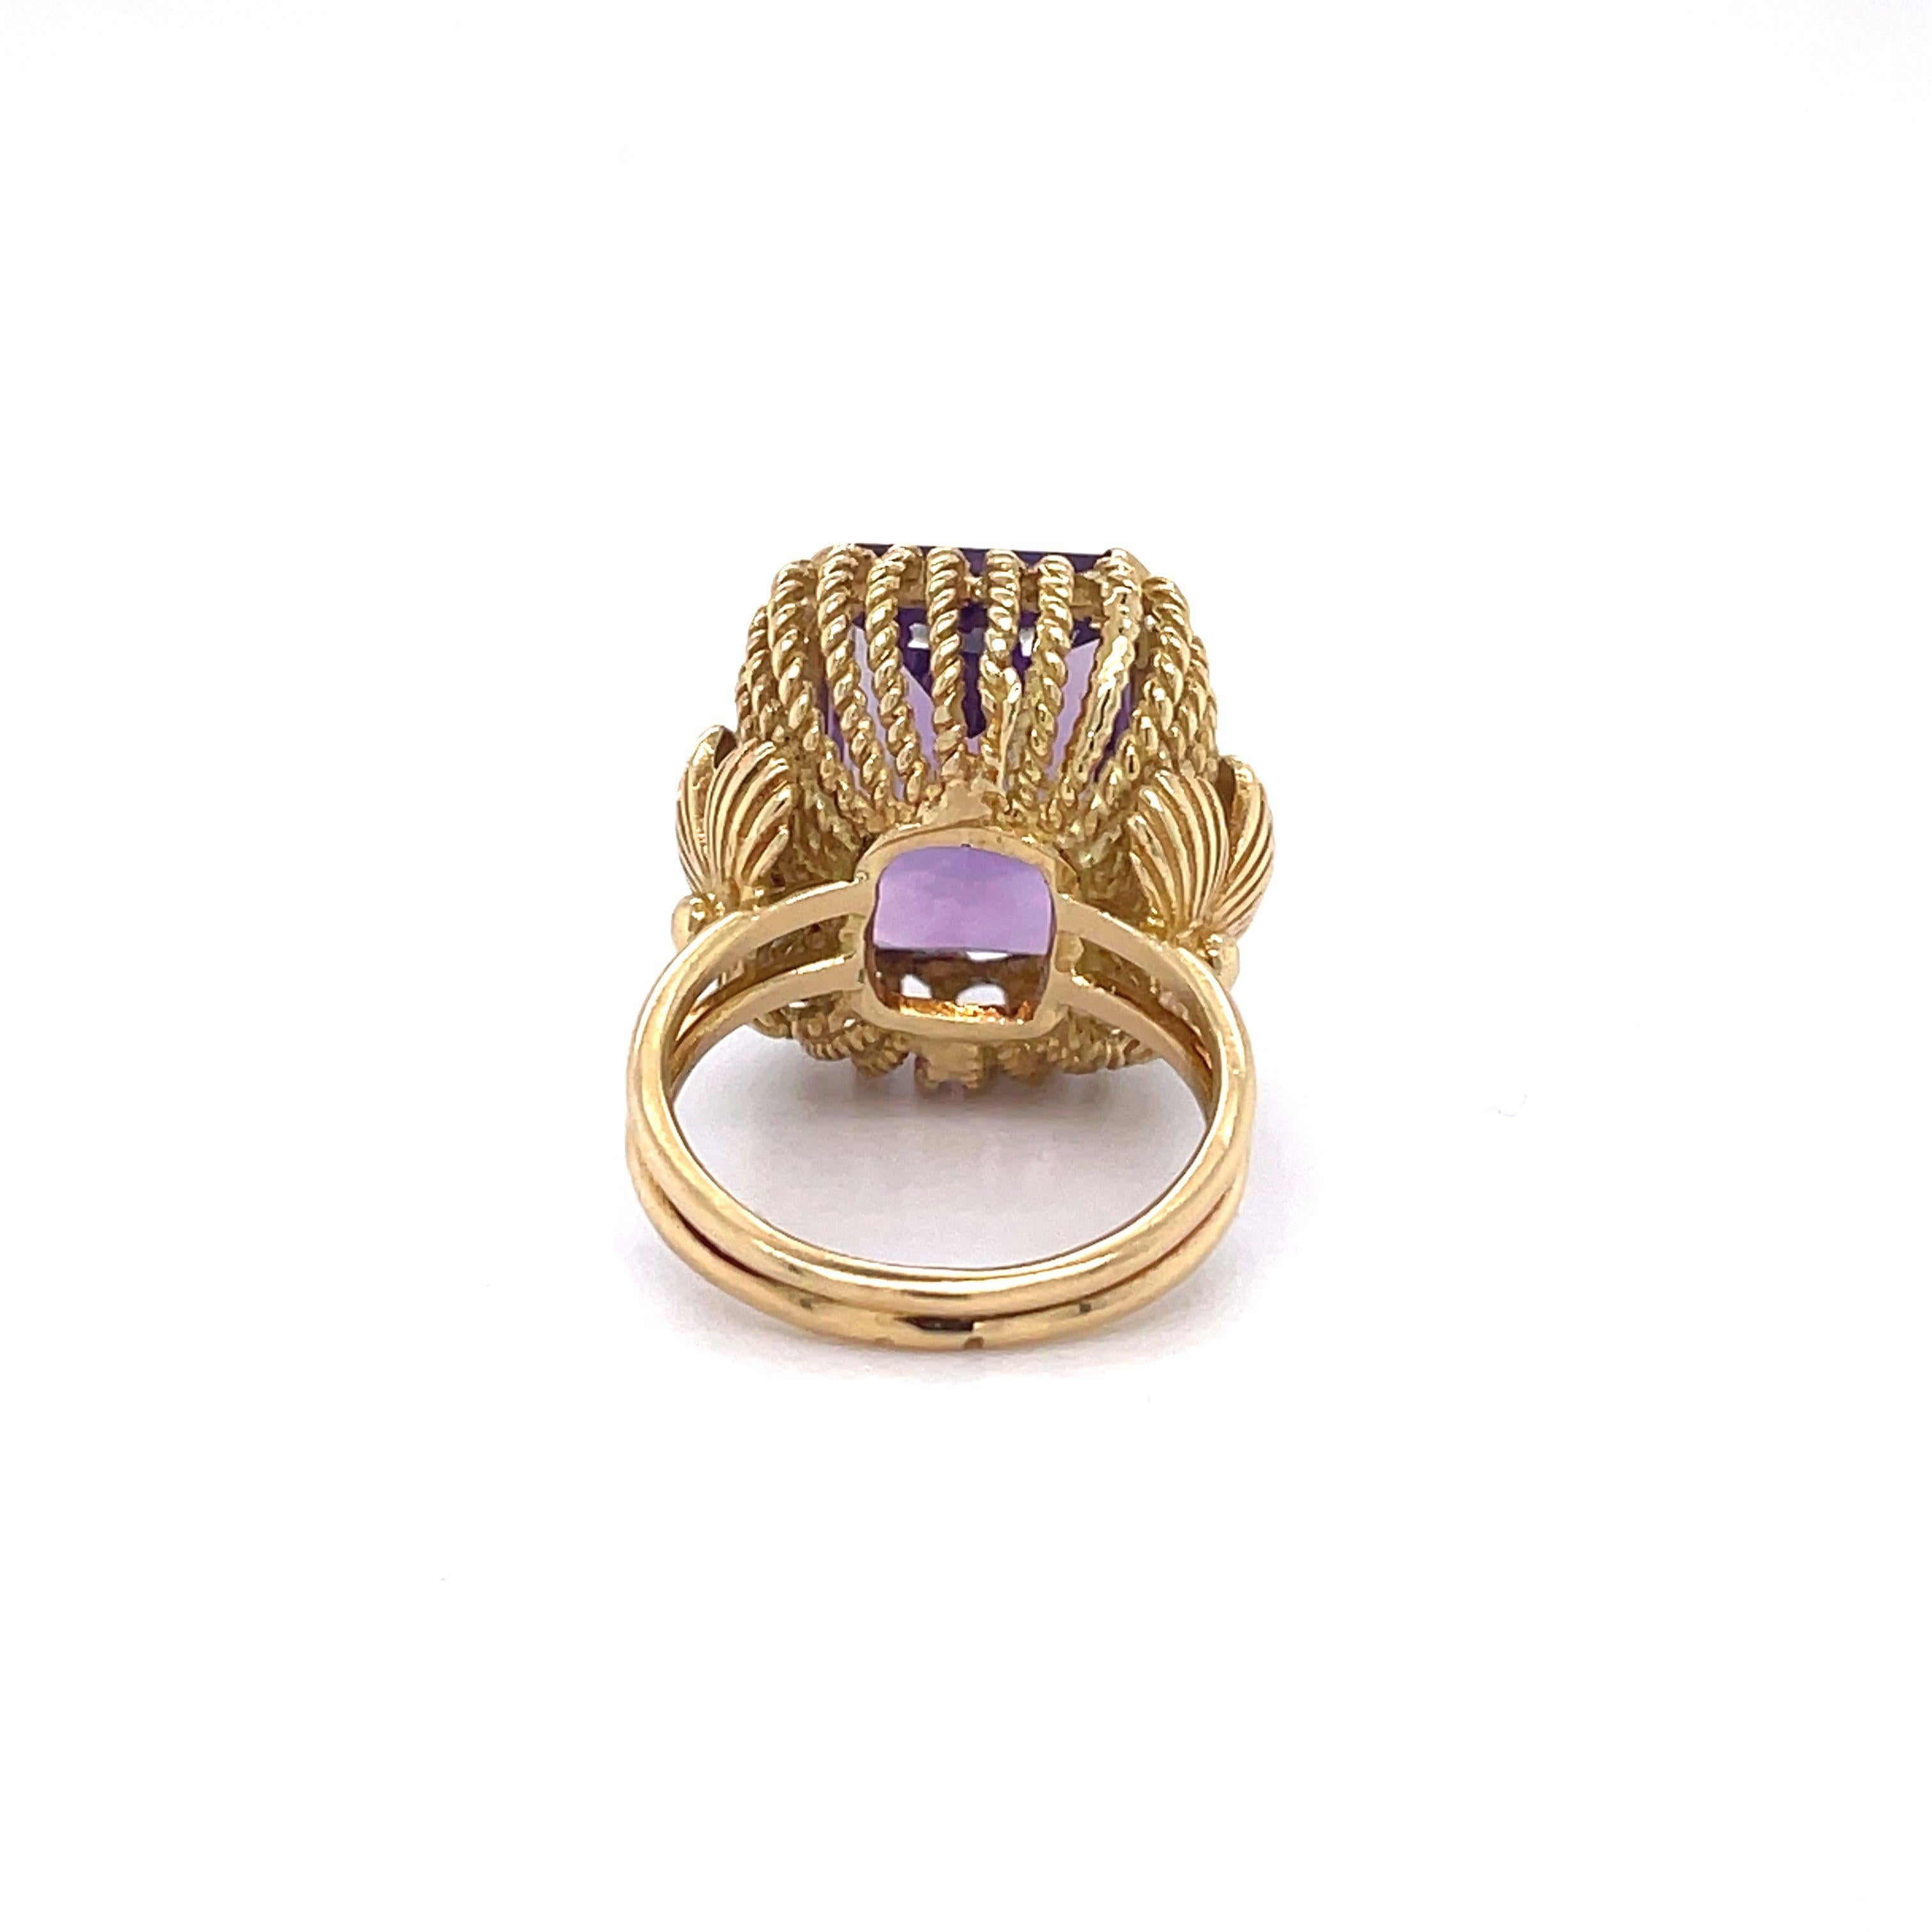 Women's Vintage Cocktail Ring, 10 Carat Emerald Cut Amethyst, Solid 18k Yellow Gold Ring For Sale